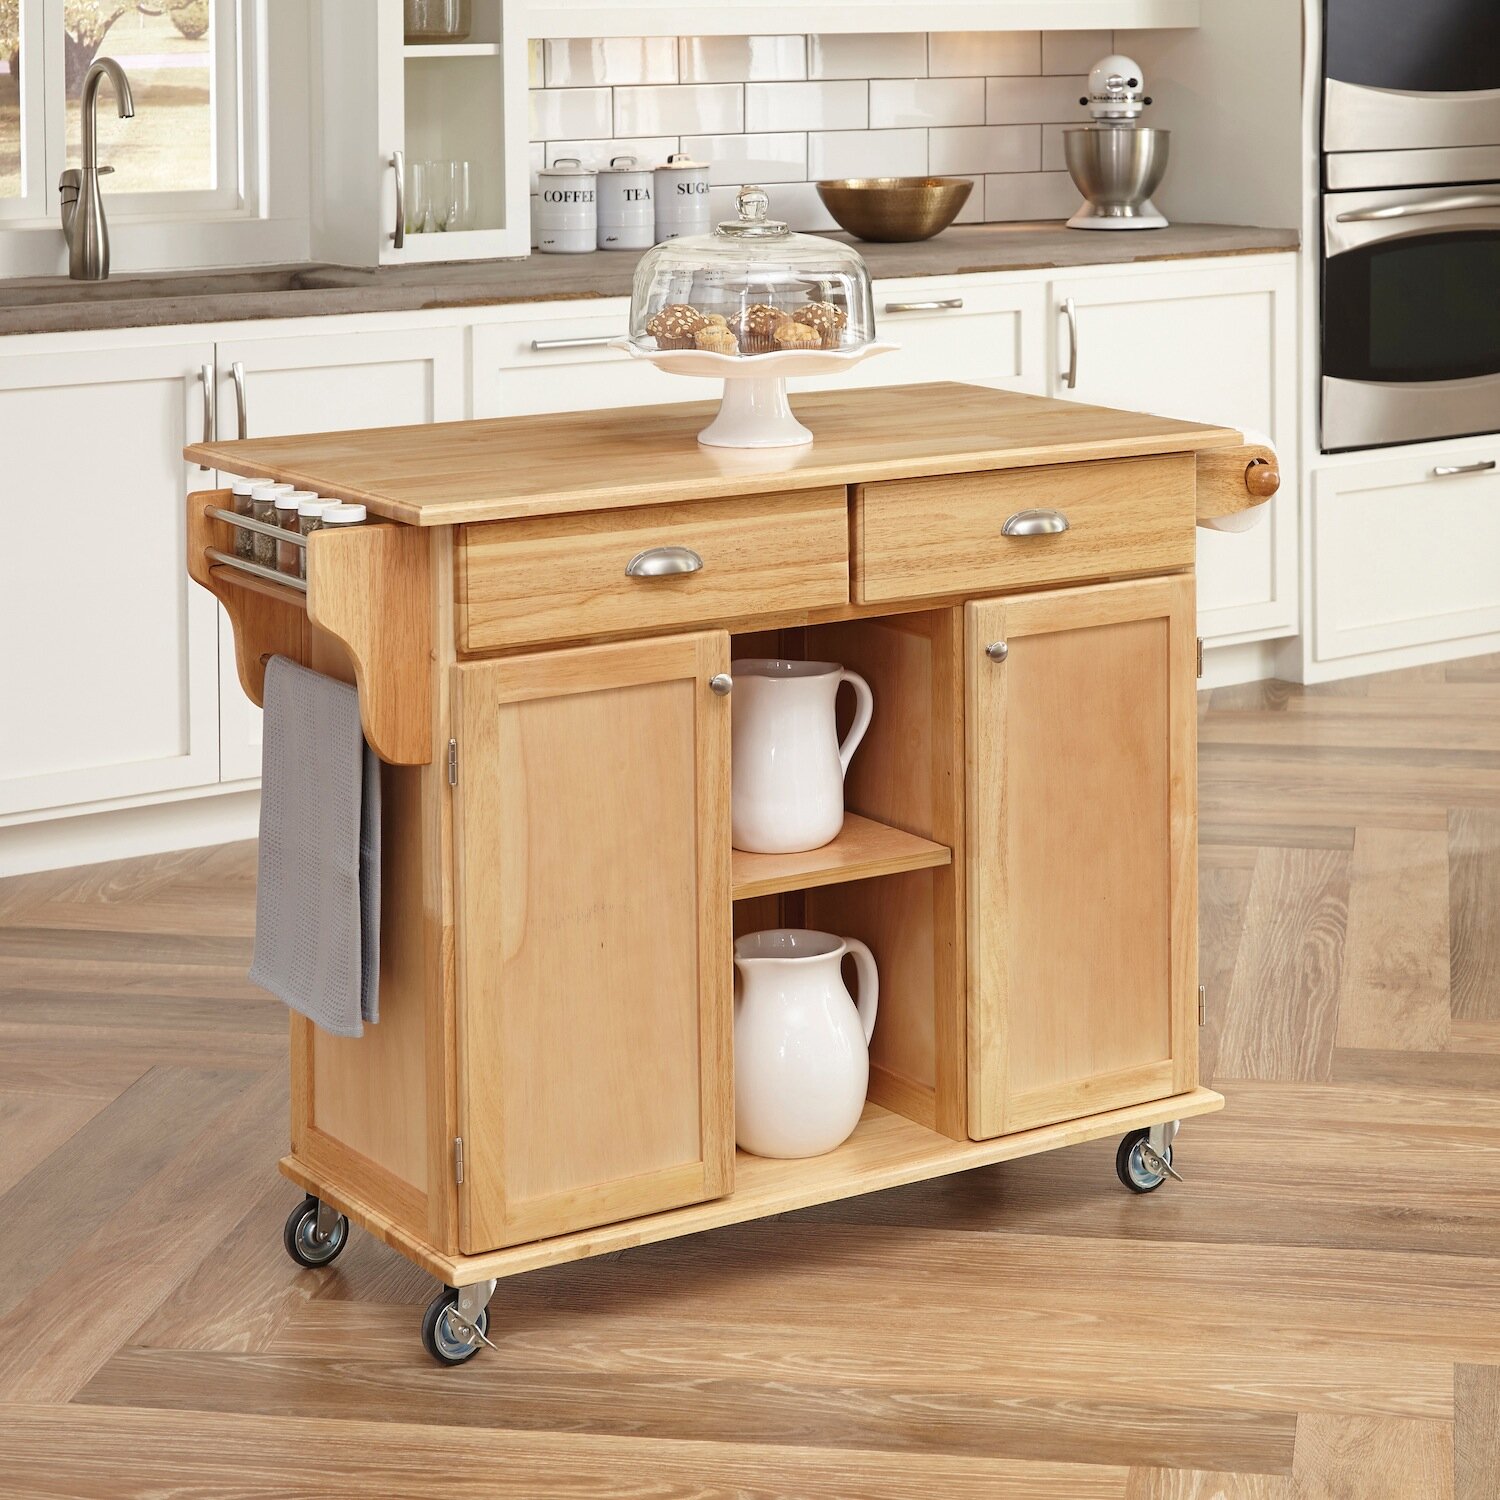 August Grove Lili Kitchen Island with Wood Top  Reviews 